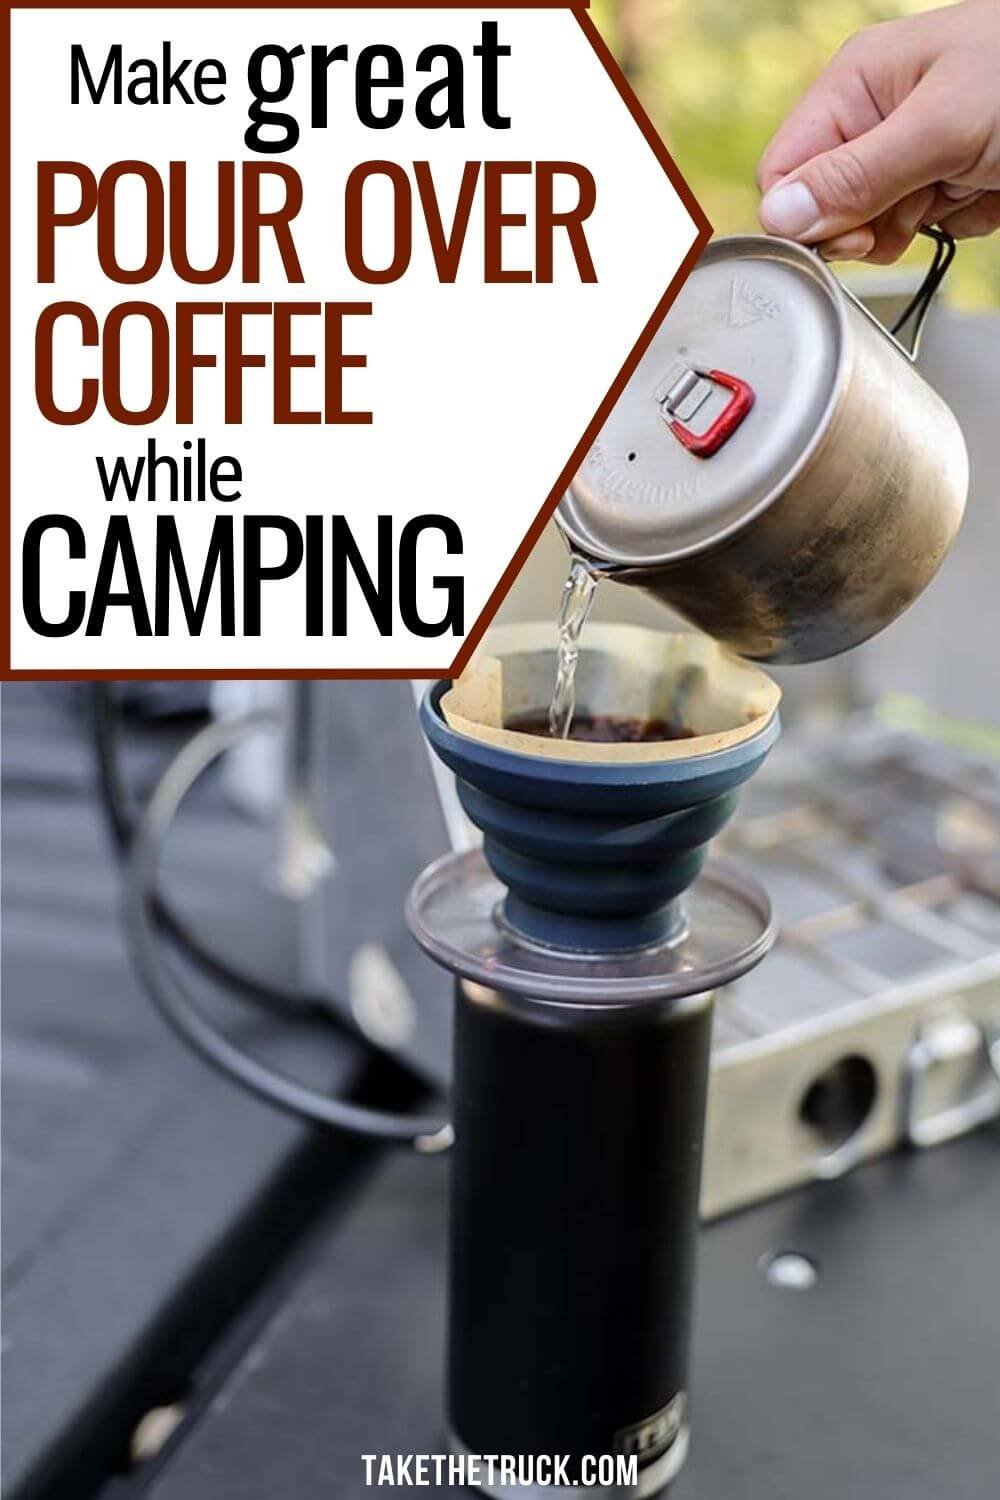 camping pour over | camp coffee pour over | pour over coffee for camping | diy camping pour over